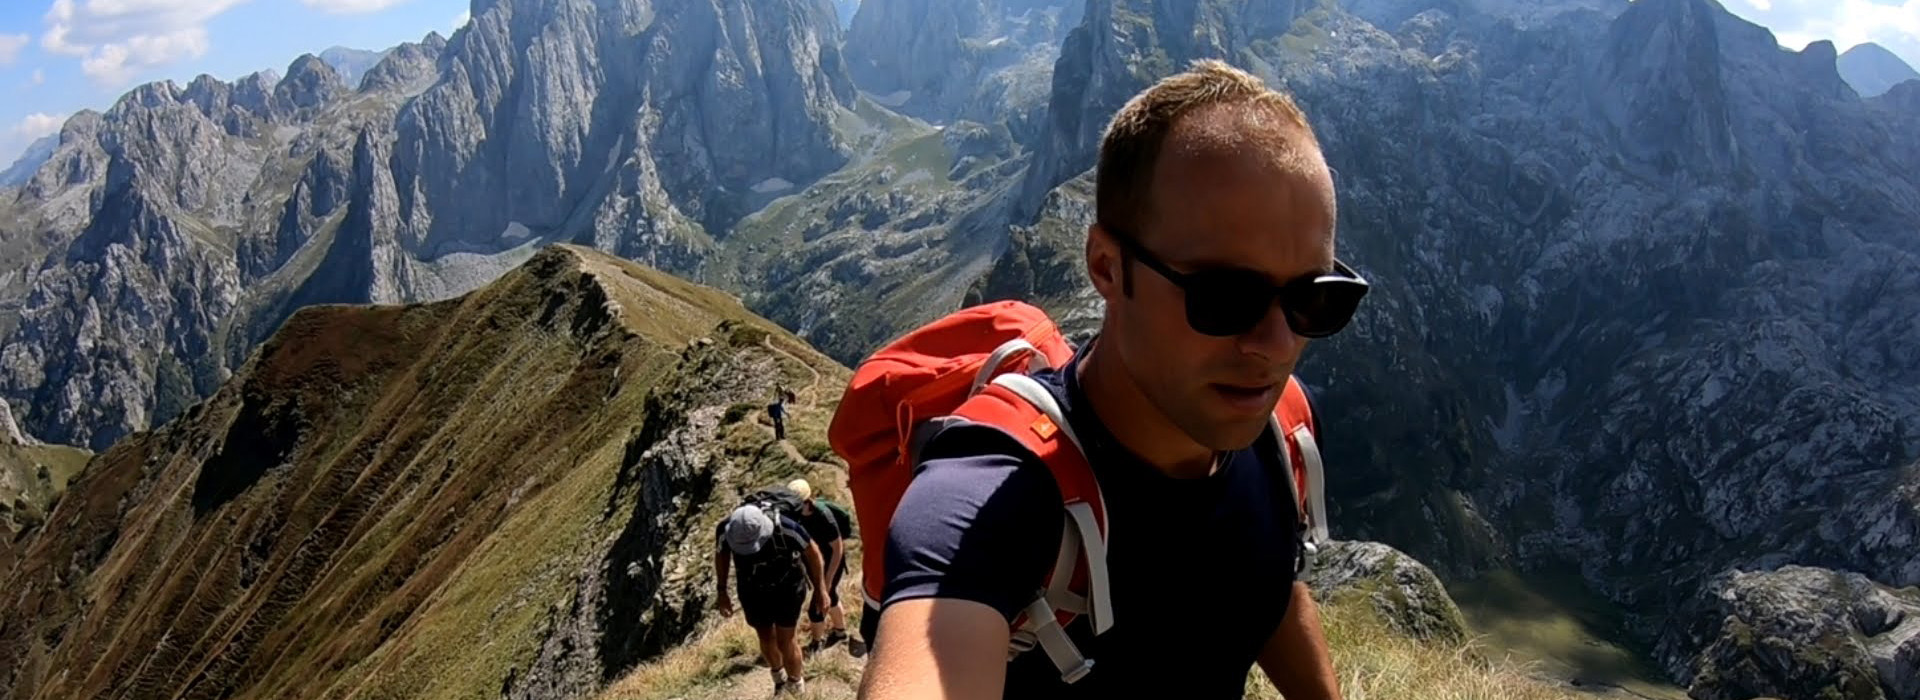 The Peaks of the Balkans walking guided holiday - Talijanka ascent